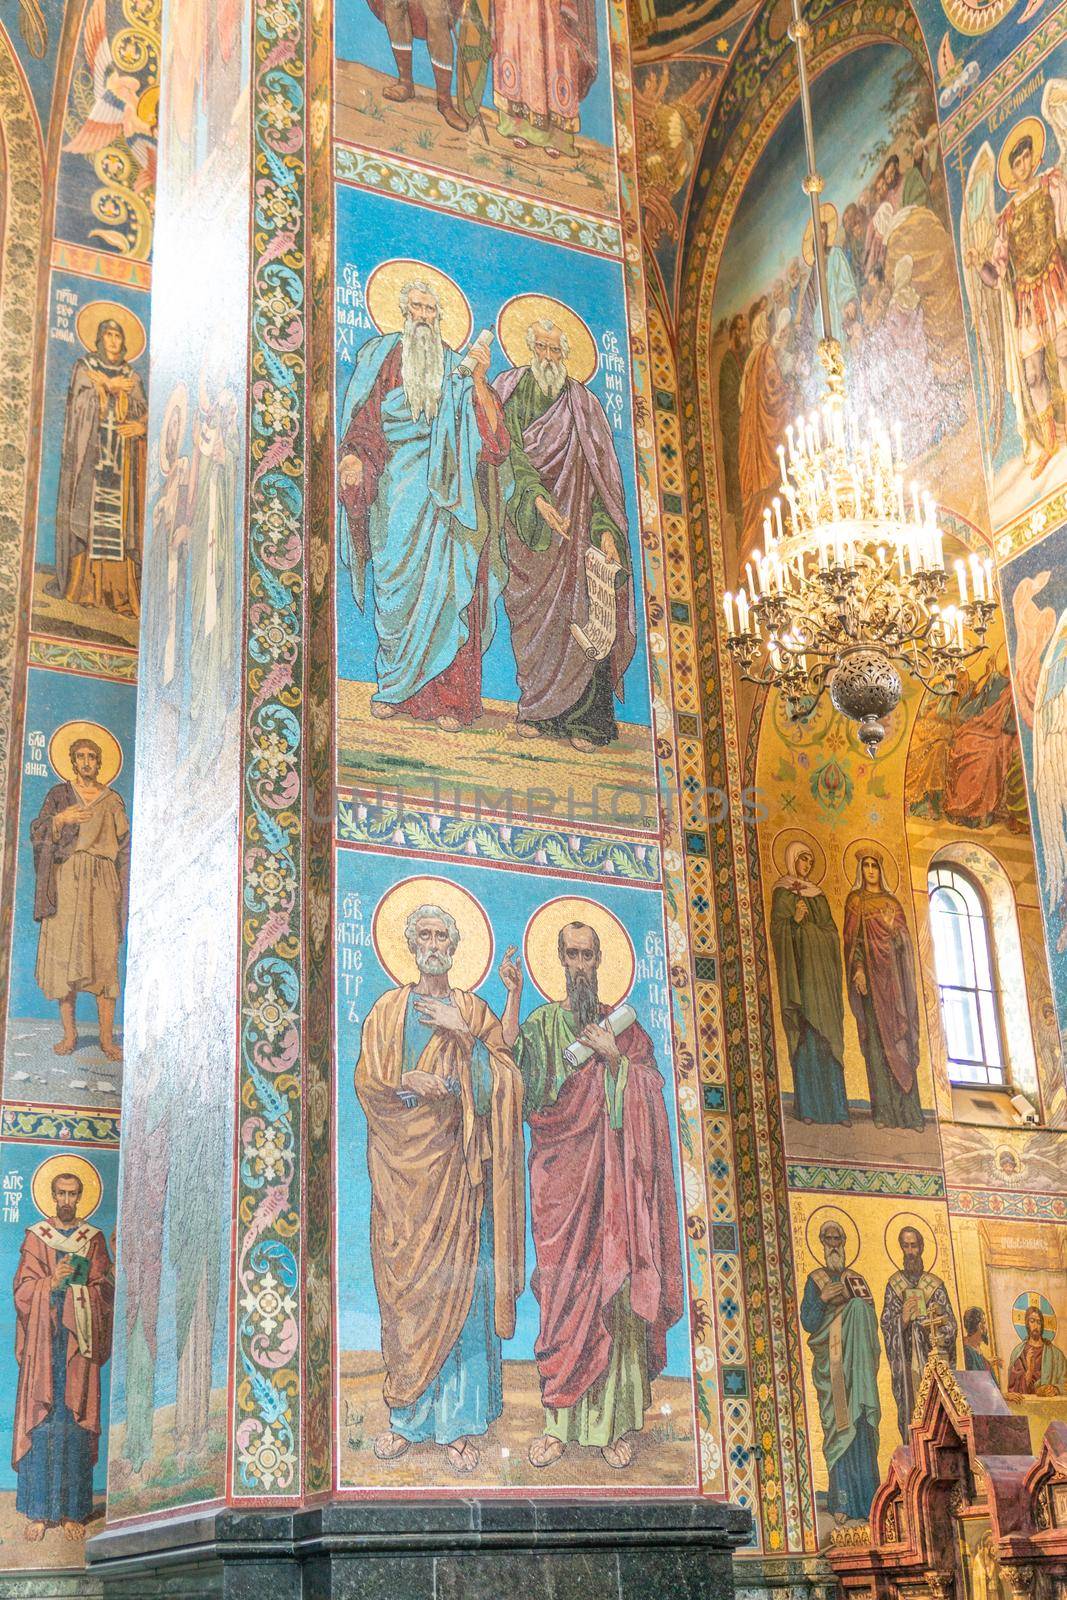 RUSSIA, PETERSBURG - AUG 21, 2022: petersburg christ russia church saint russian building st icon, for painting savior for na and religion mosaic, dome spilt. Pattern st columns, by 89167702191